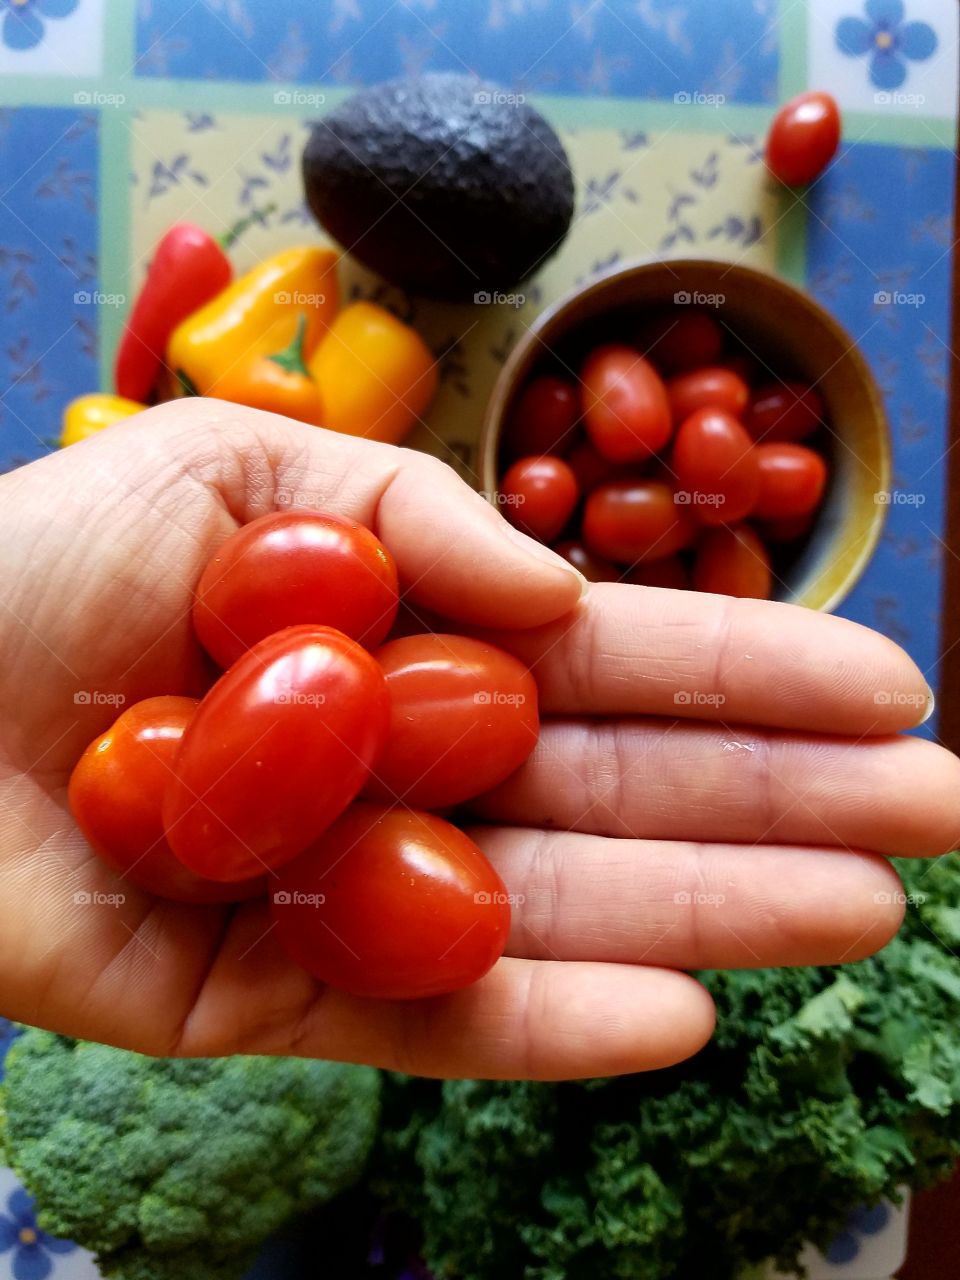 Holding grape tomatoes